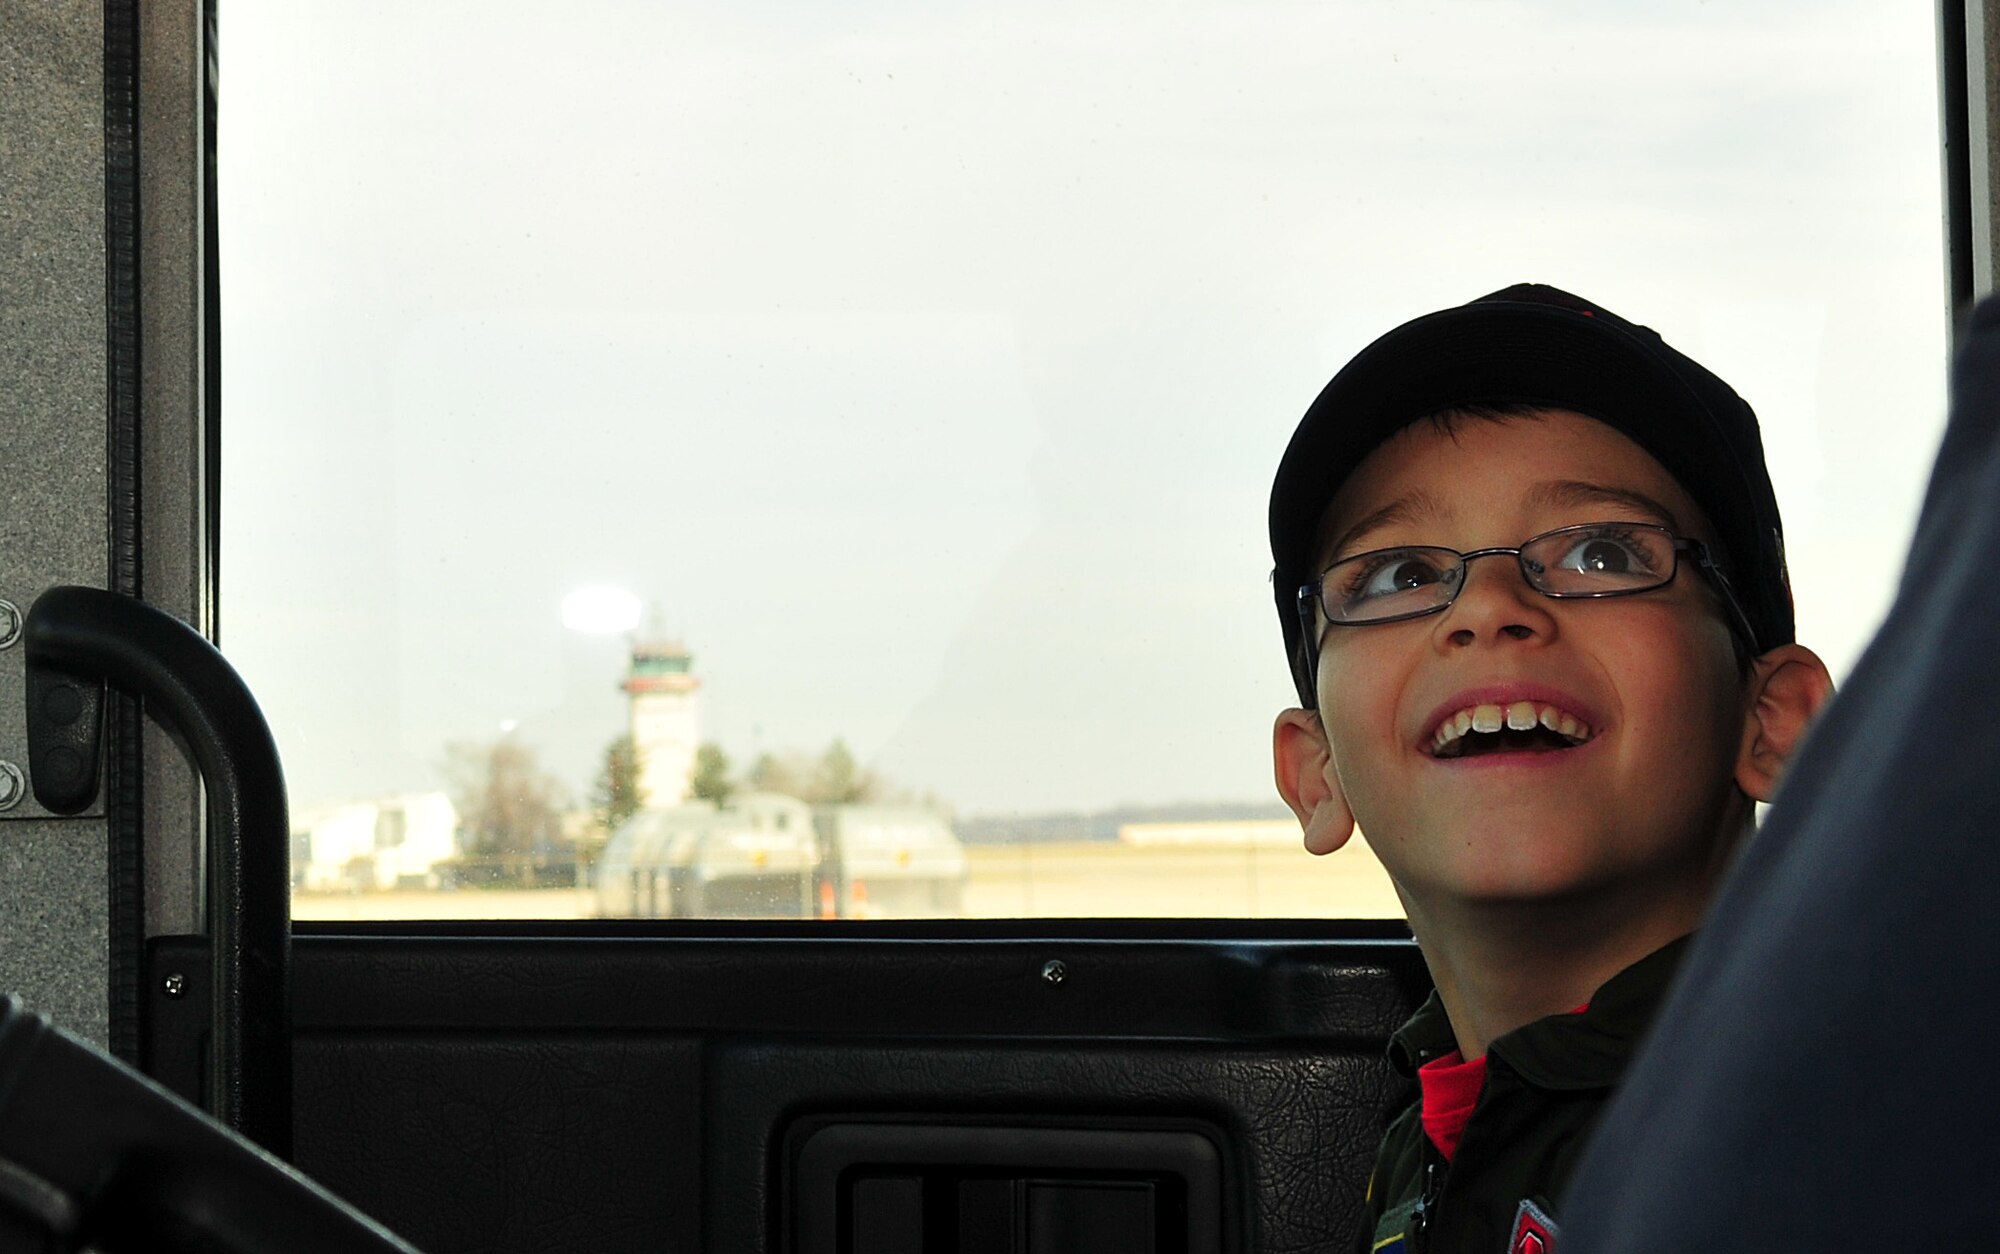 The 121st Air Refueling Wing hosted eight year old Roman Pettograsso for their inaugural pilot for a day program Dec 11, 2014, at Rickenbacker Air National Guard Base, Ohio. (U.S. National Guard photo by Airman 1st Class Wendy Kuhn/released)

